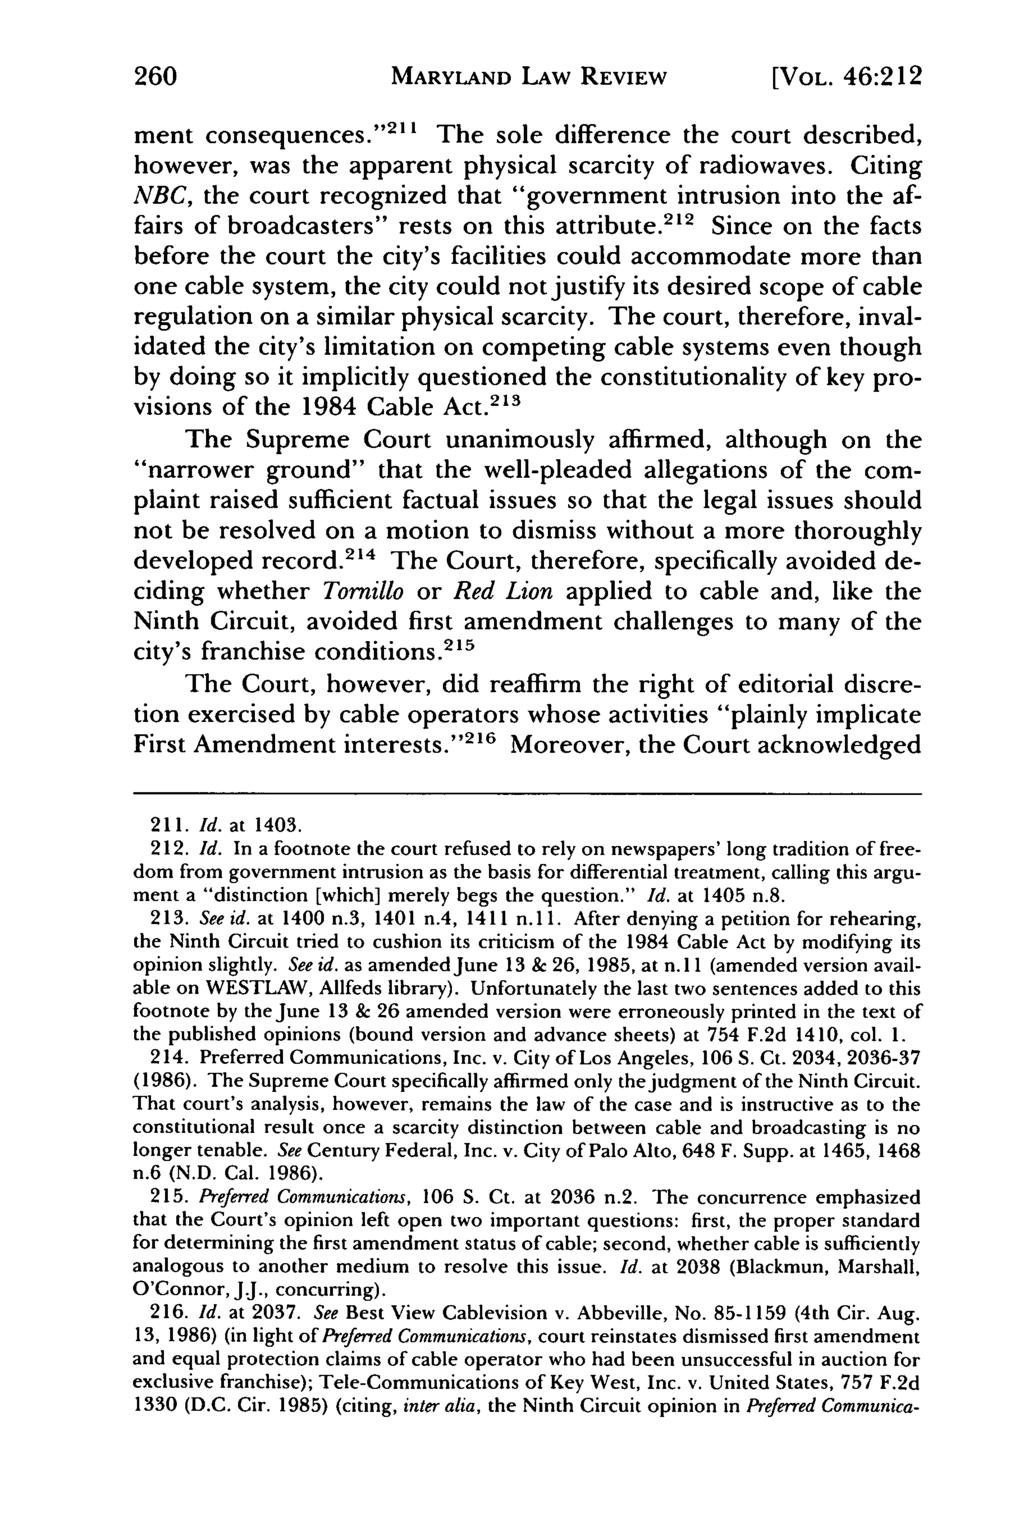 260 MARYLAND LAW REVIEW [VOL. 46:212 ment consequences." ' The sole difference the court described, however, was the apparent physical scarcity of radiowaves.